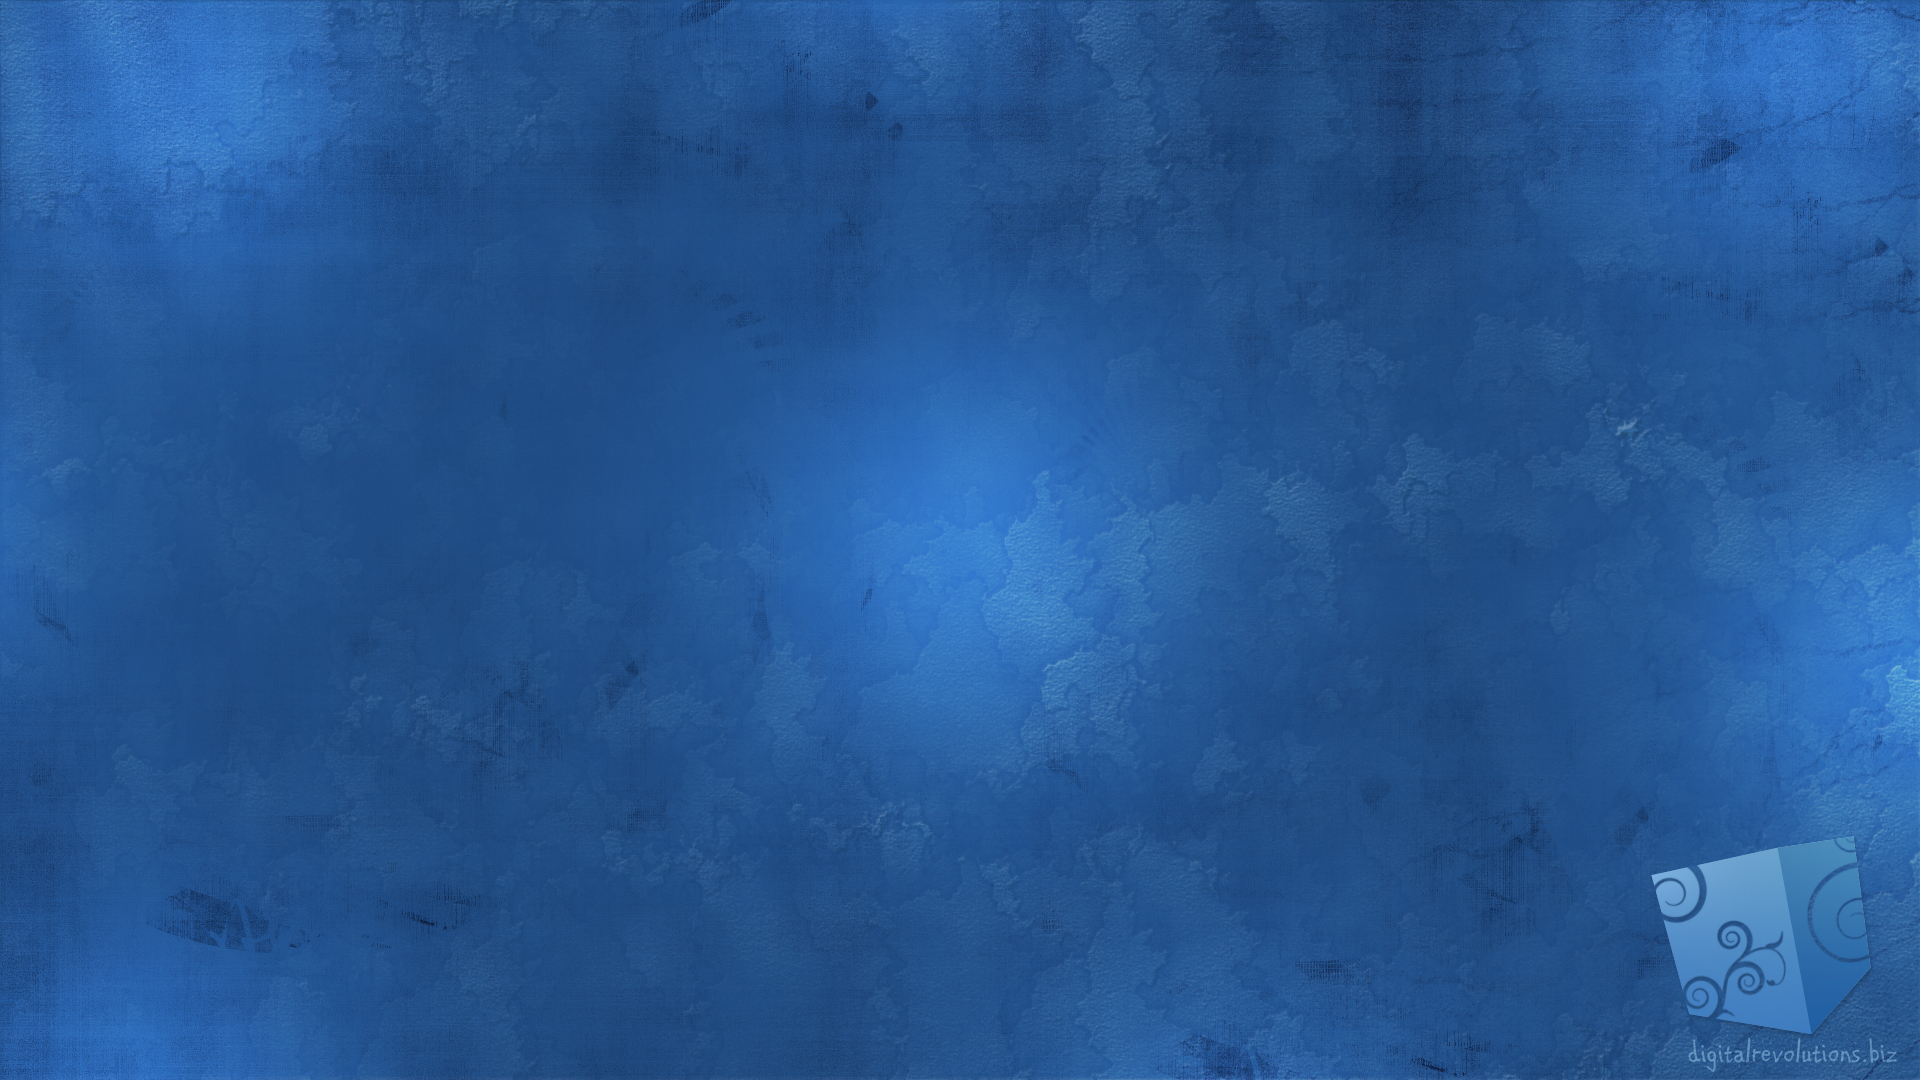 Cool Blue Abstract Background Digital Revolutions